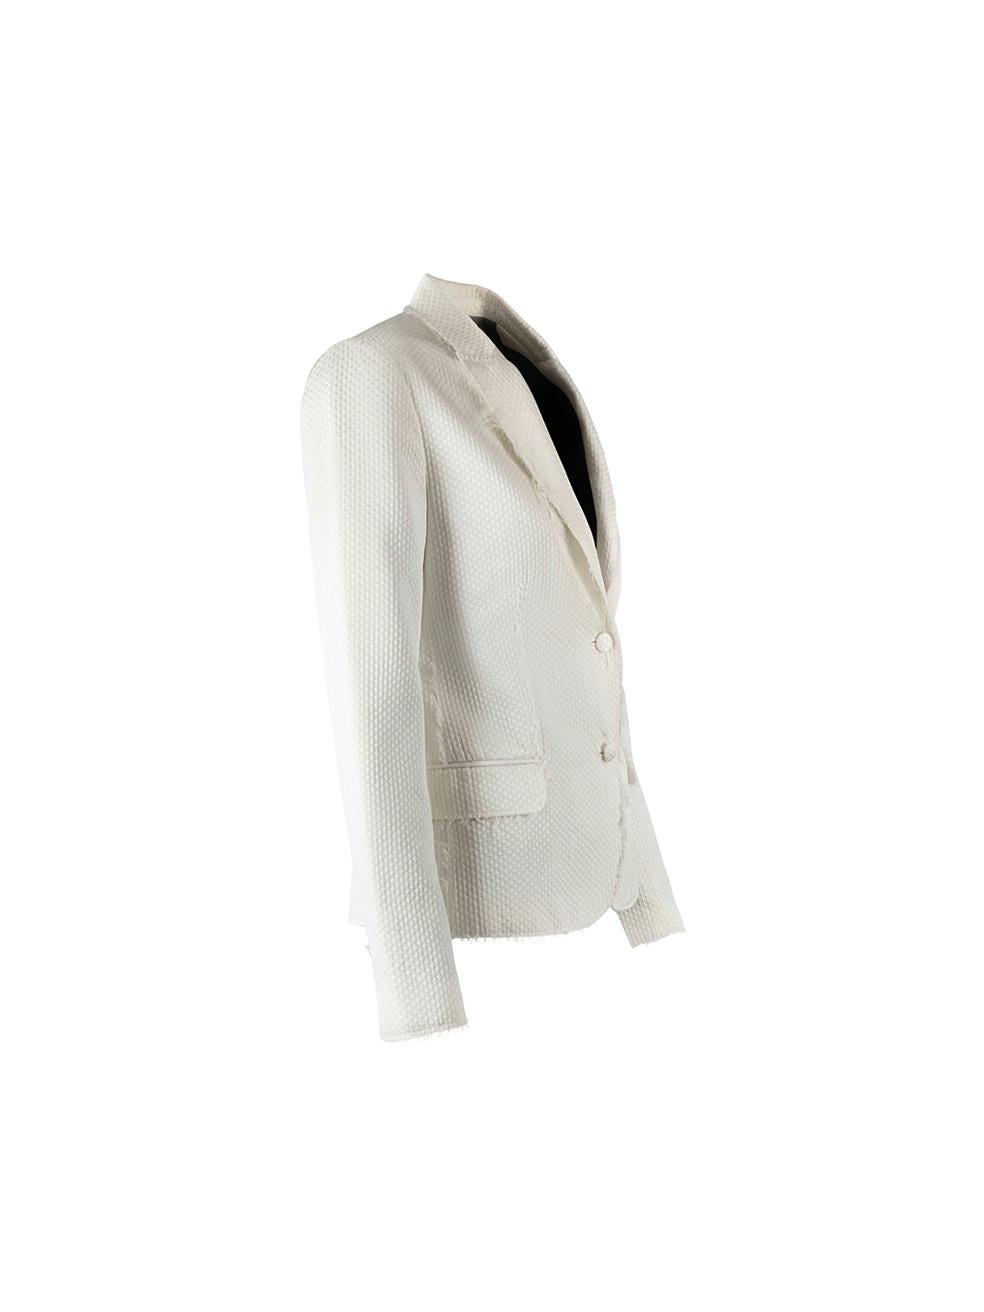 CONDITION is Very good. Minimal wear to jacket is evident. Minimal wear to neckline lining with makeup marks and the brand label has become unattached at one side on this used Zadig & Voltaire Deluxe designer resale item.